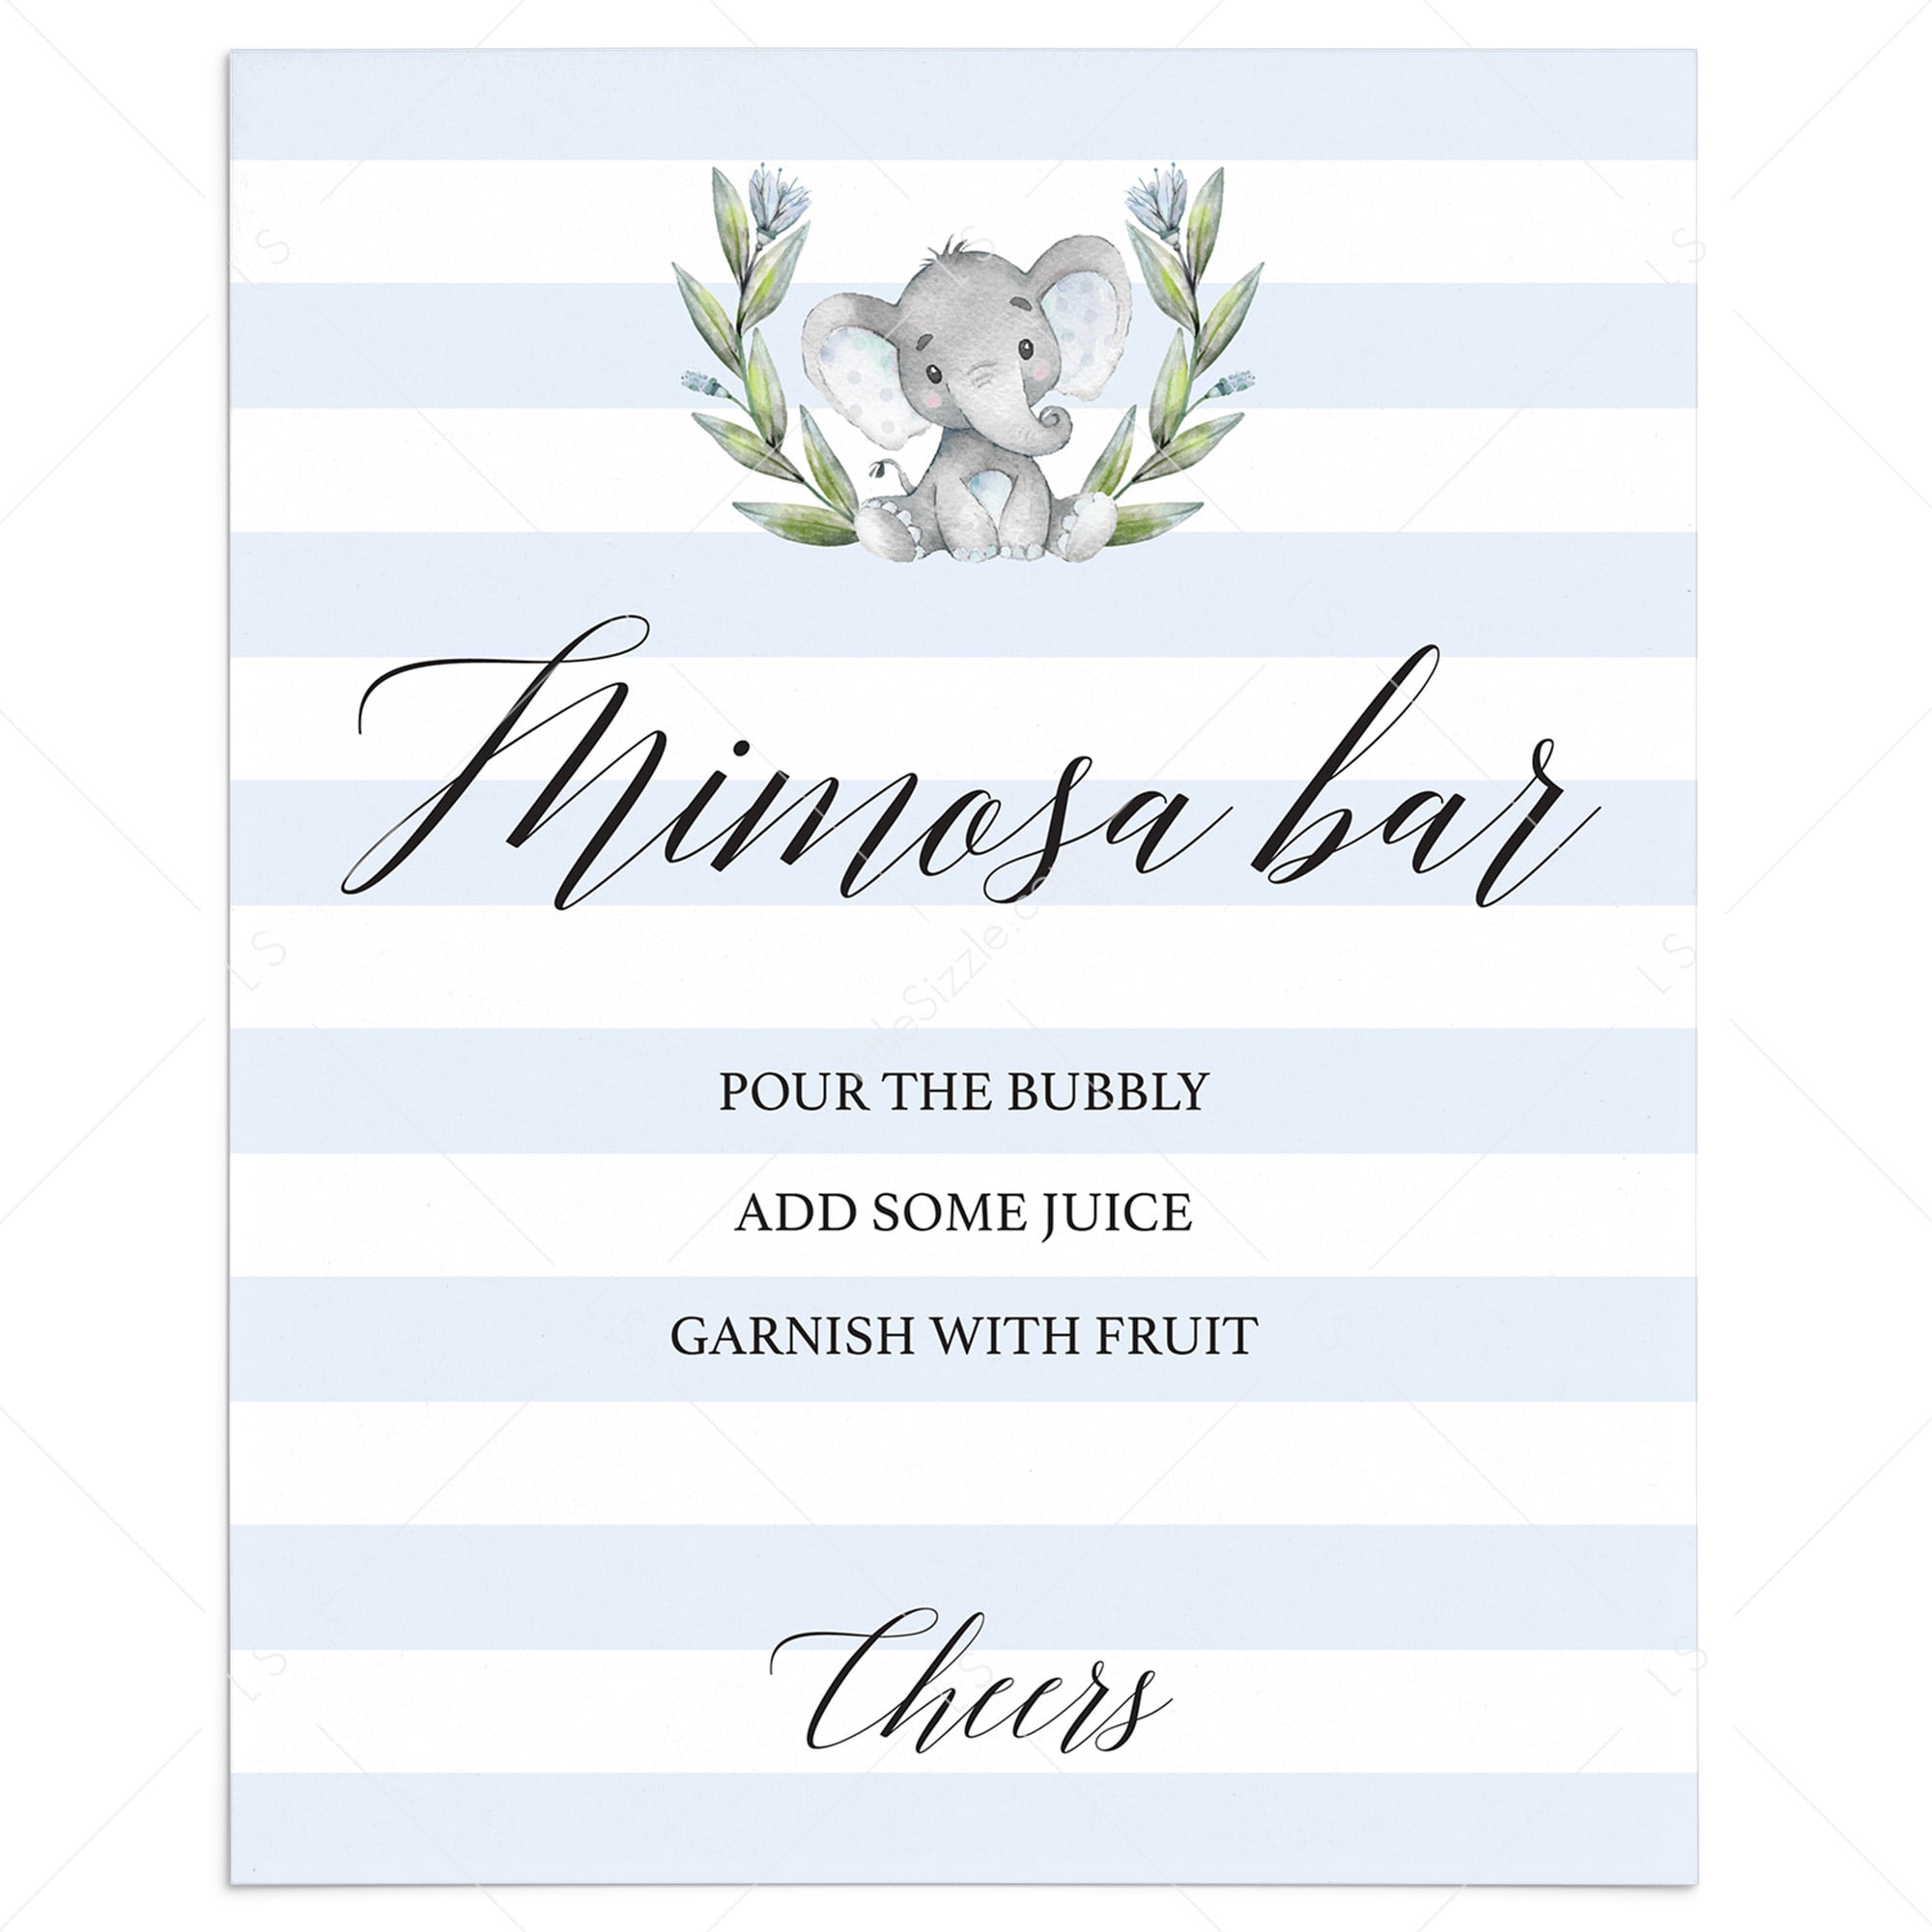 Printable mimosa bar table sign for elephant themed baby shower by LittleSizzle